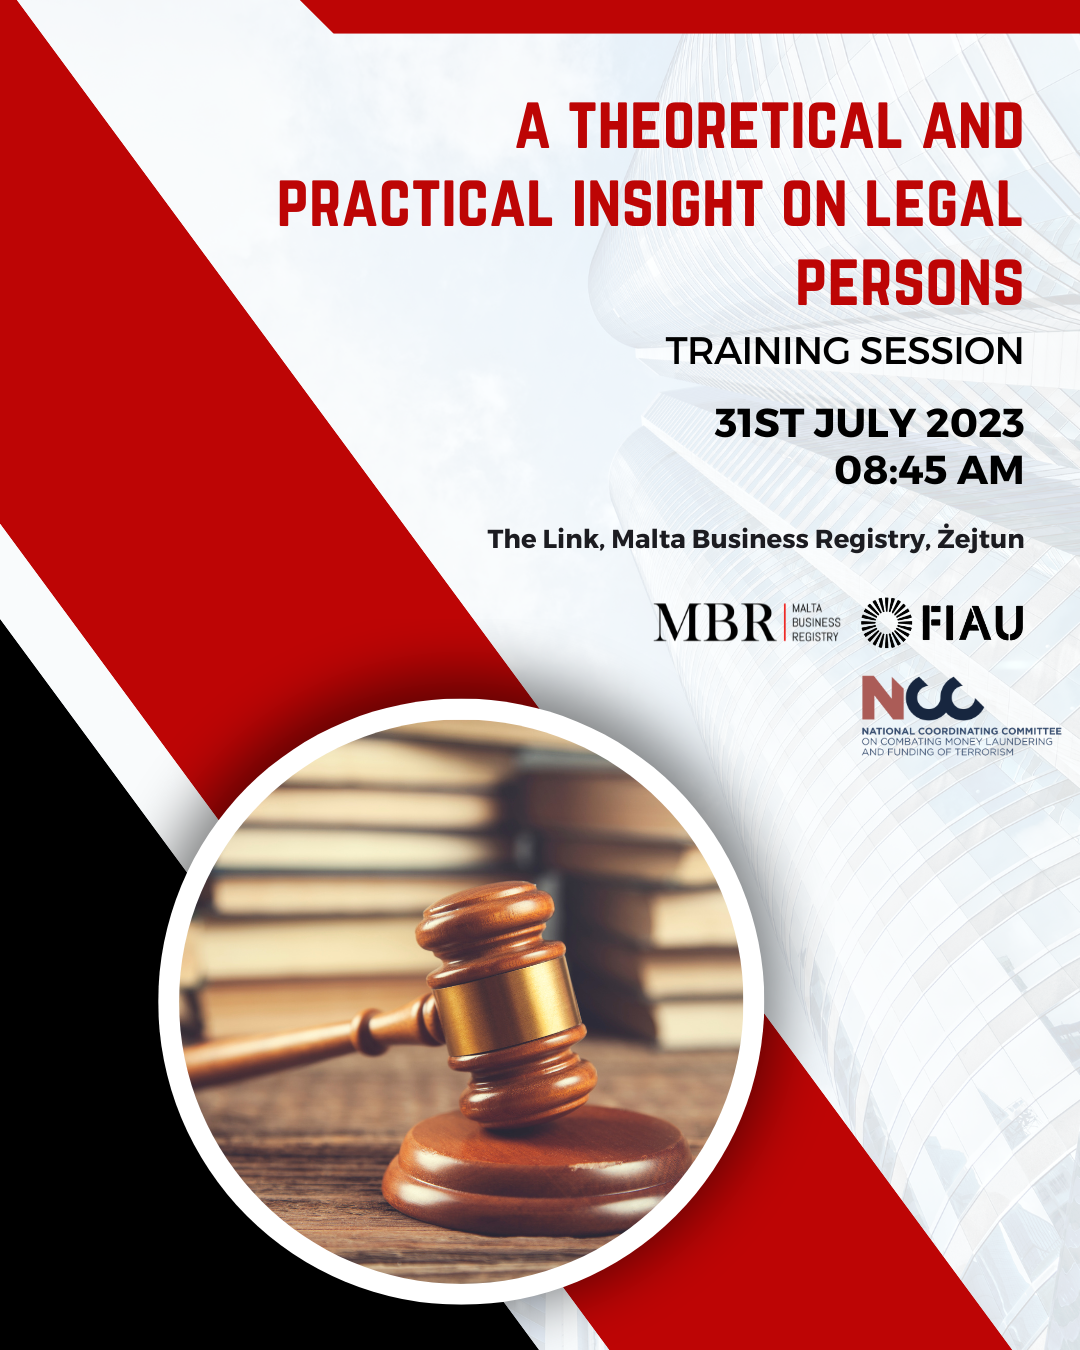 A theoretical and practical insight on legal p﻿ersons - Training Session poster